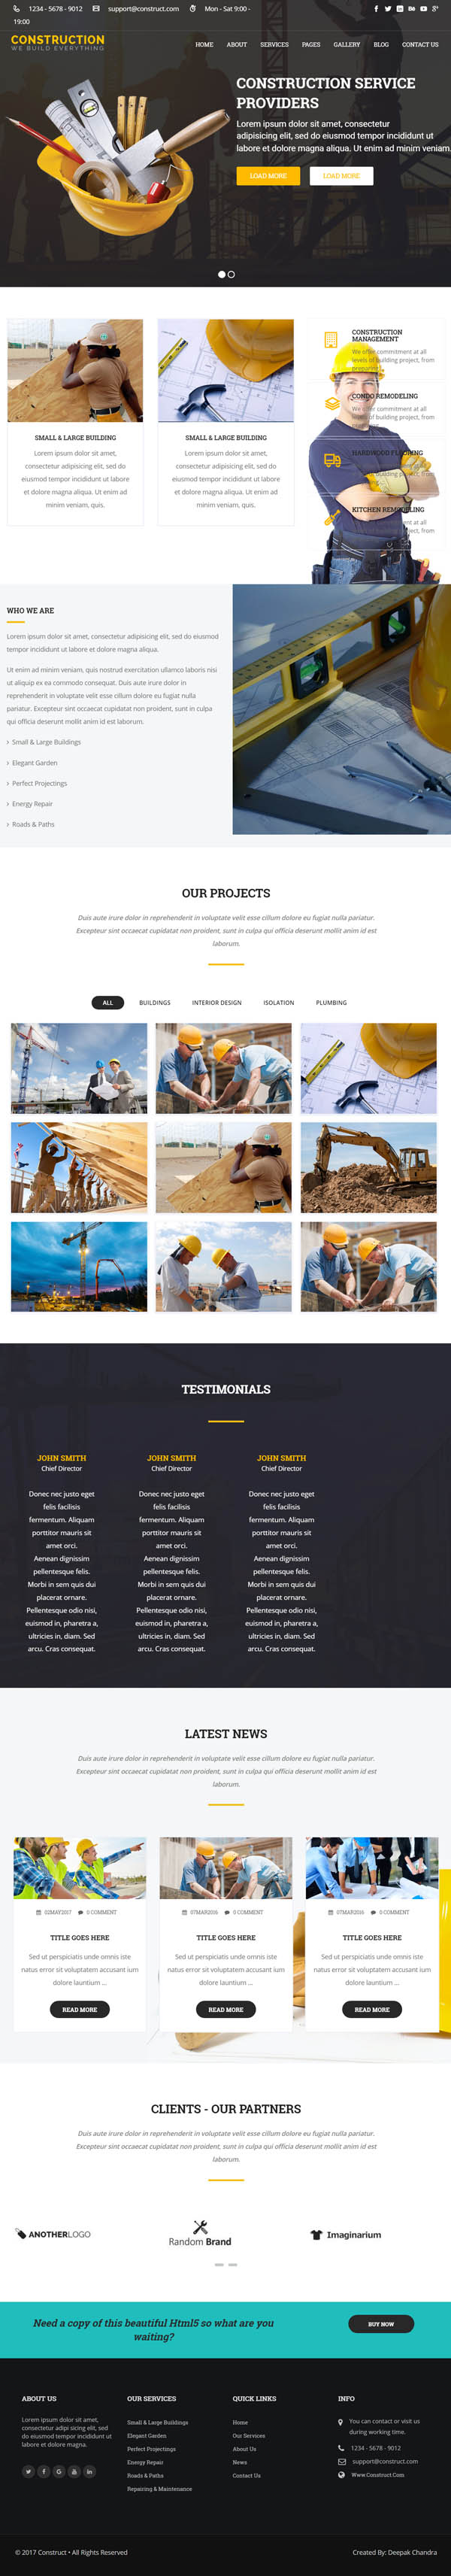 Construction - WordPress Theme for Construction Business